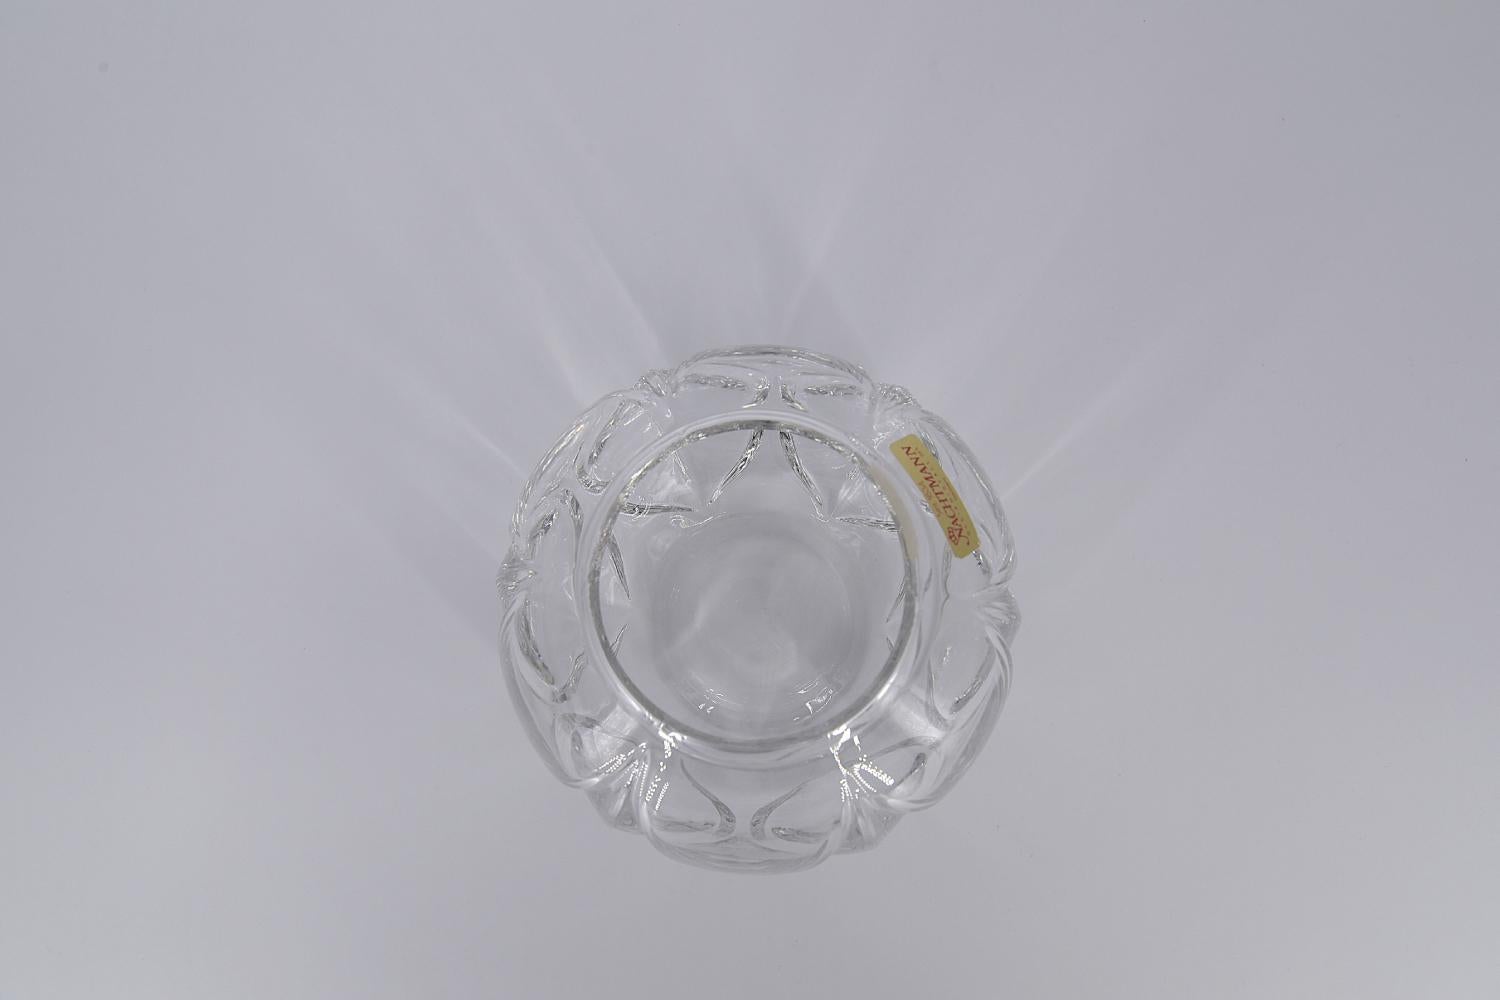 This spherical vase was made by the German glass factory Nachtmann during the 1960s. The vase is made of high quality 24% Bleikristall 24% lead crystal. It has decorative motifs.

The Nachtmann Manufactory was founded in 1834 by Michael Nachtmann